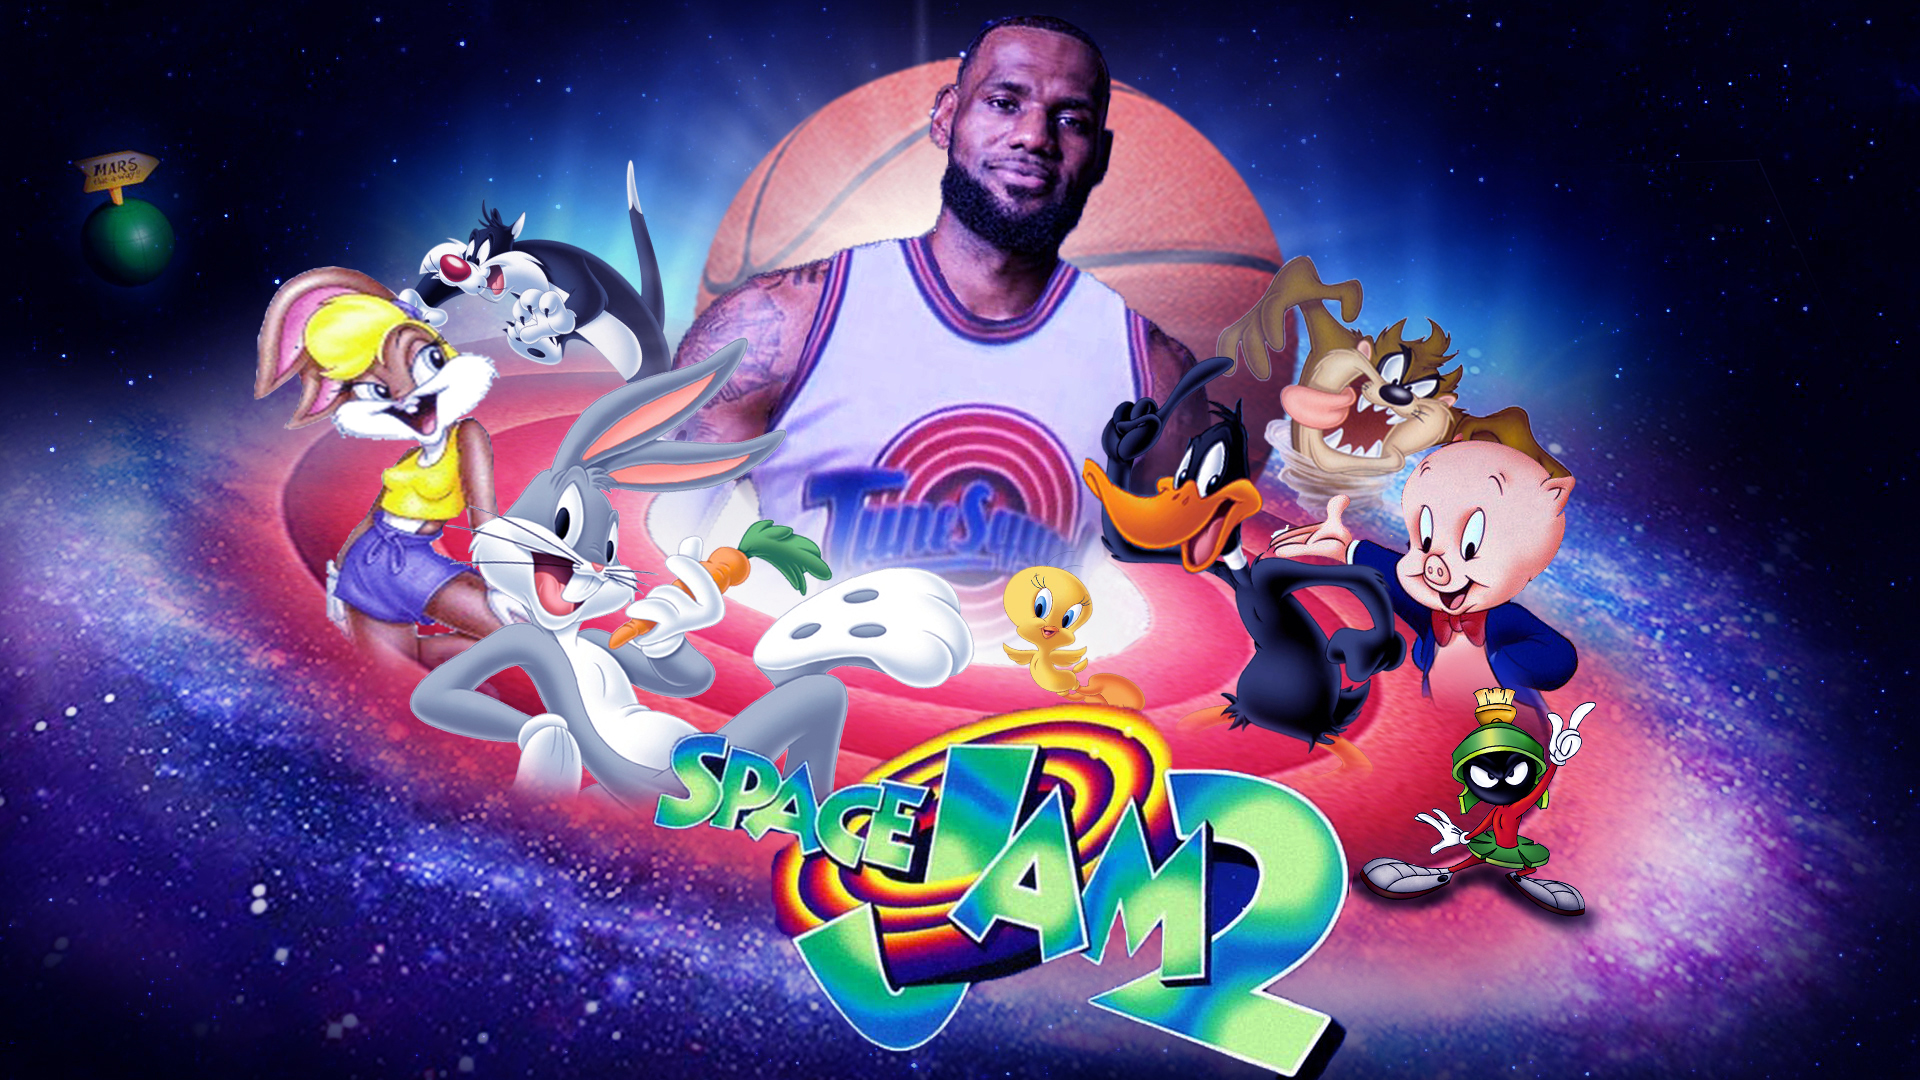 Whos excited about Space Jam 2   Lebron james art Basketball  drawings Looney tunes wallpaper